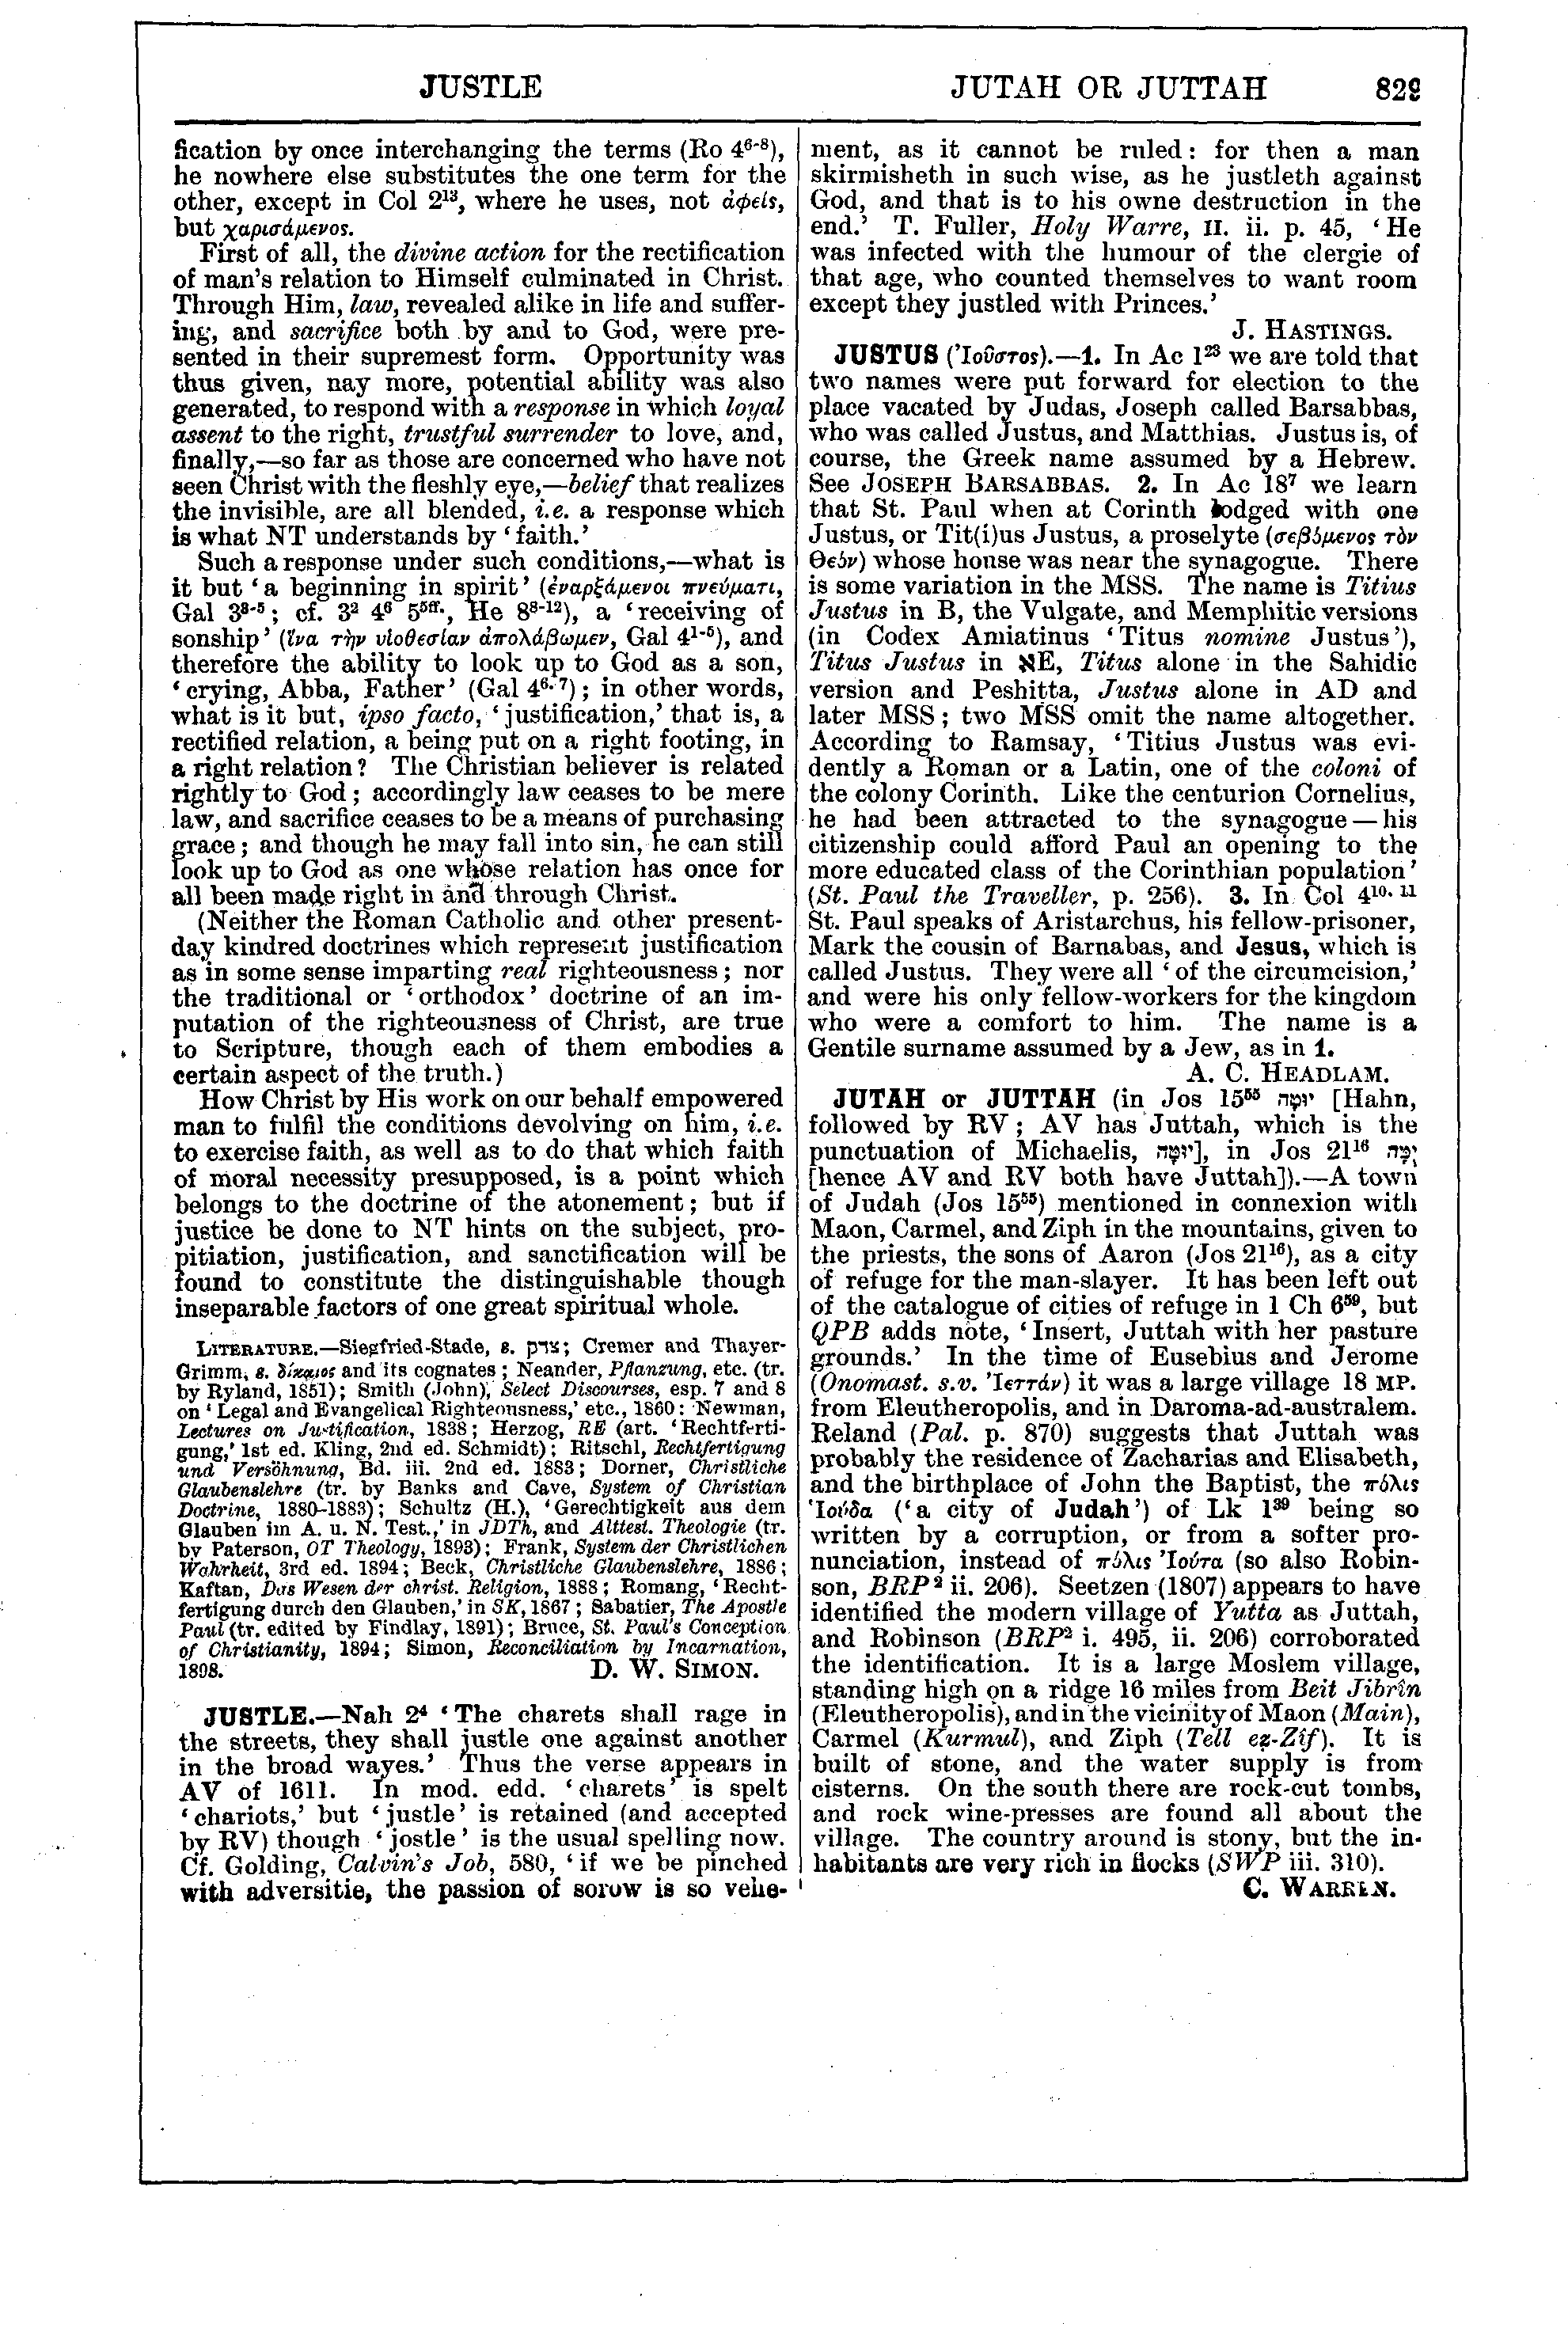 Image of page 829